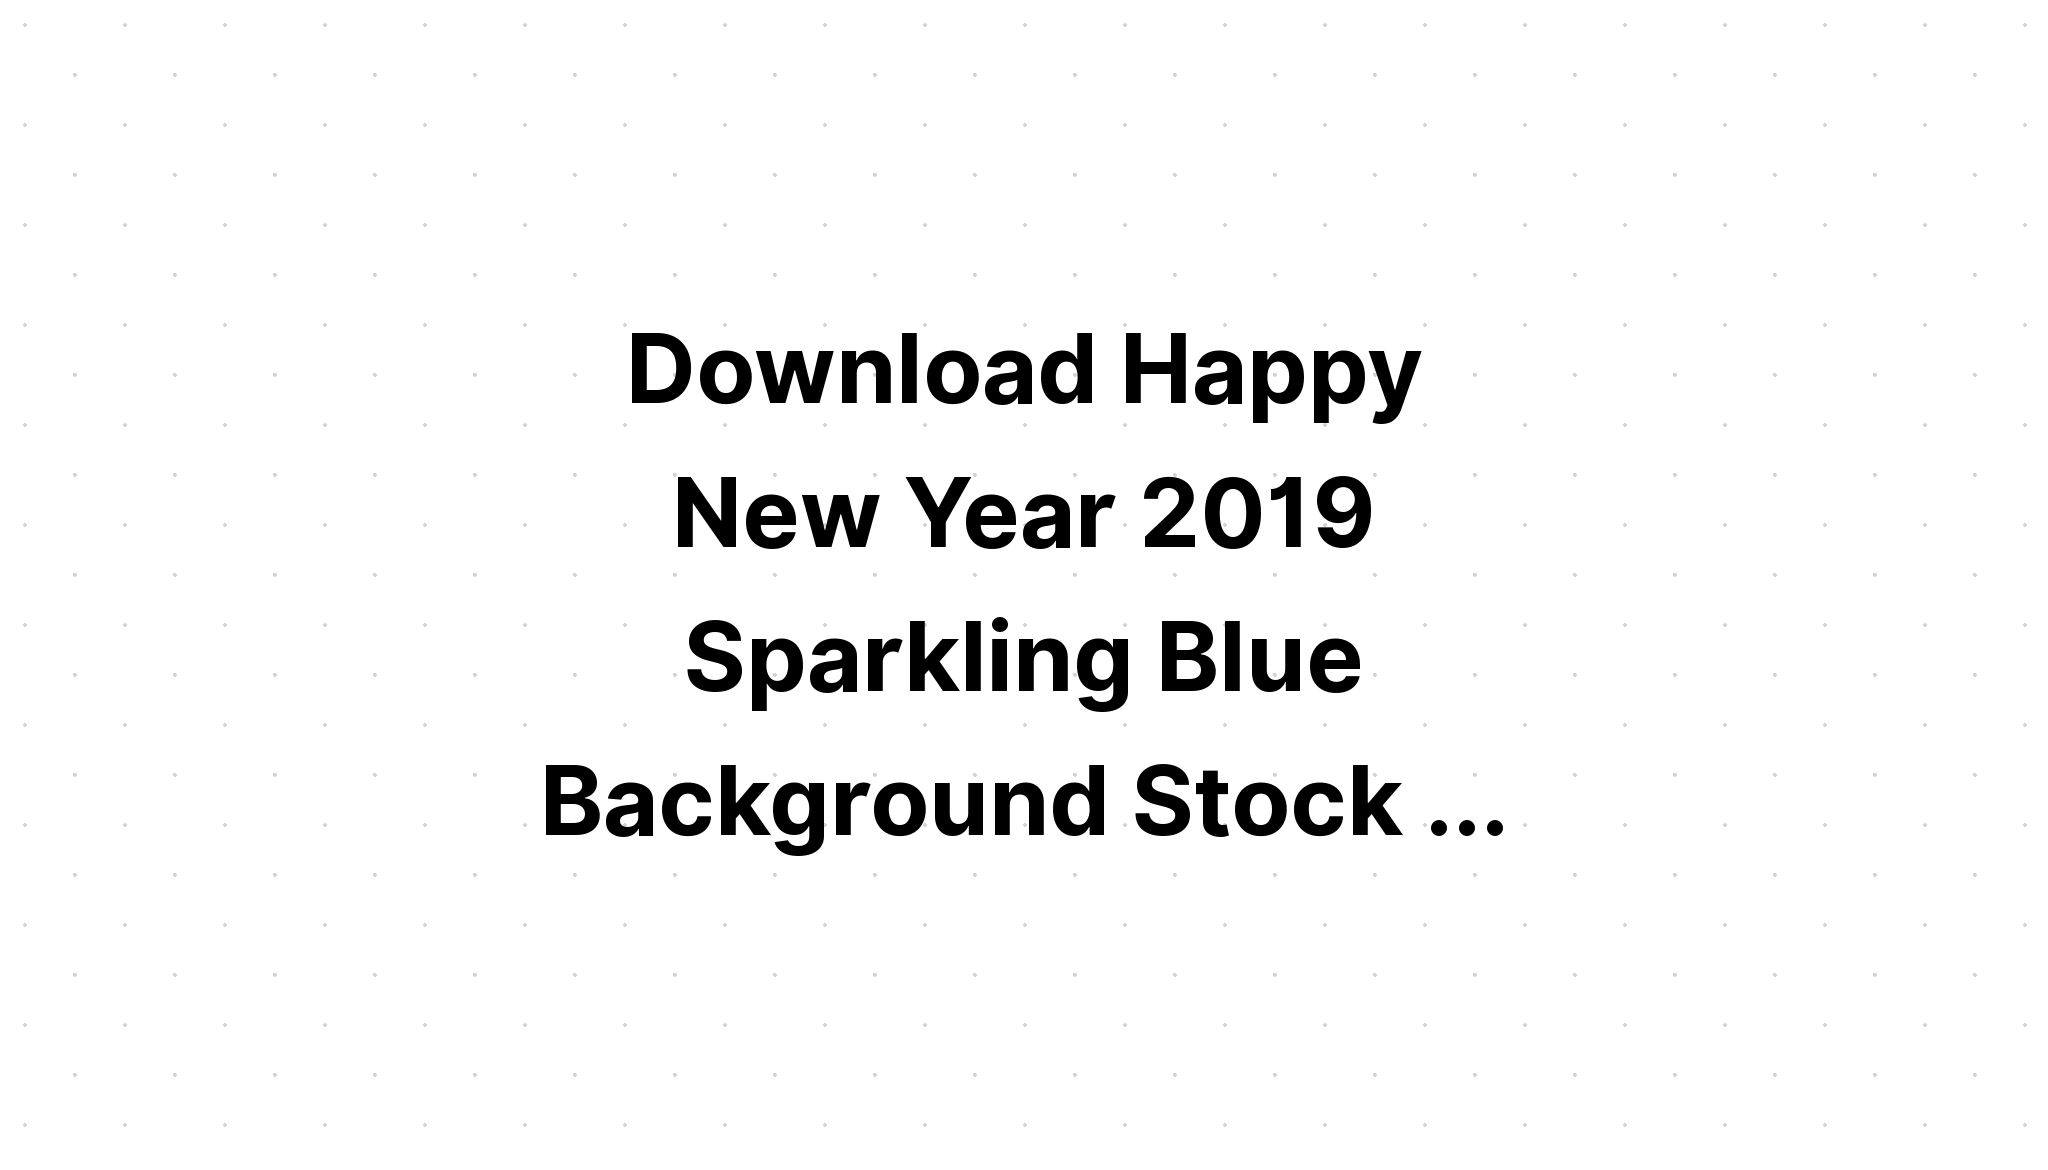 Download Happy New Year Background Simple SVG File